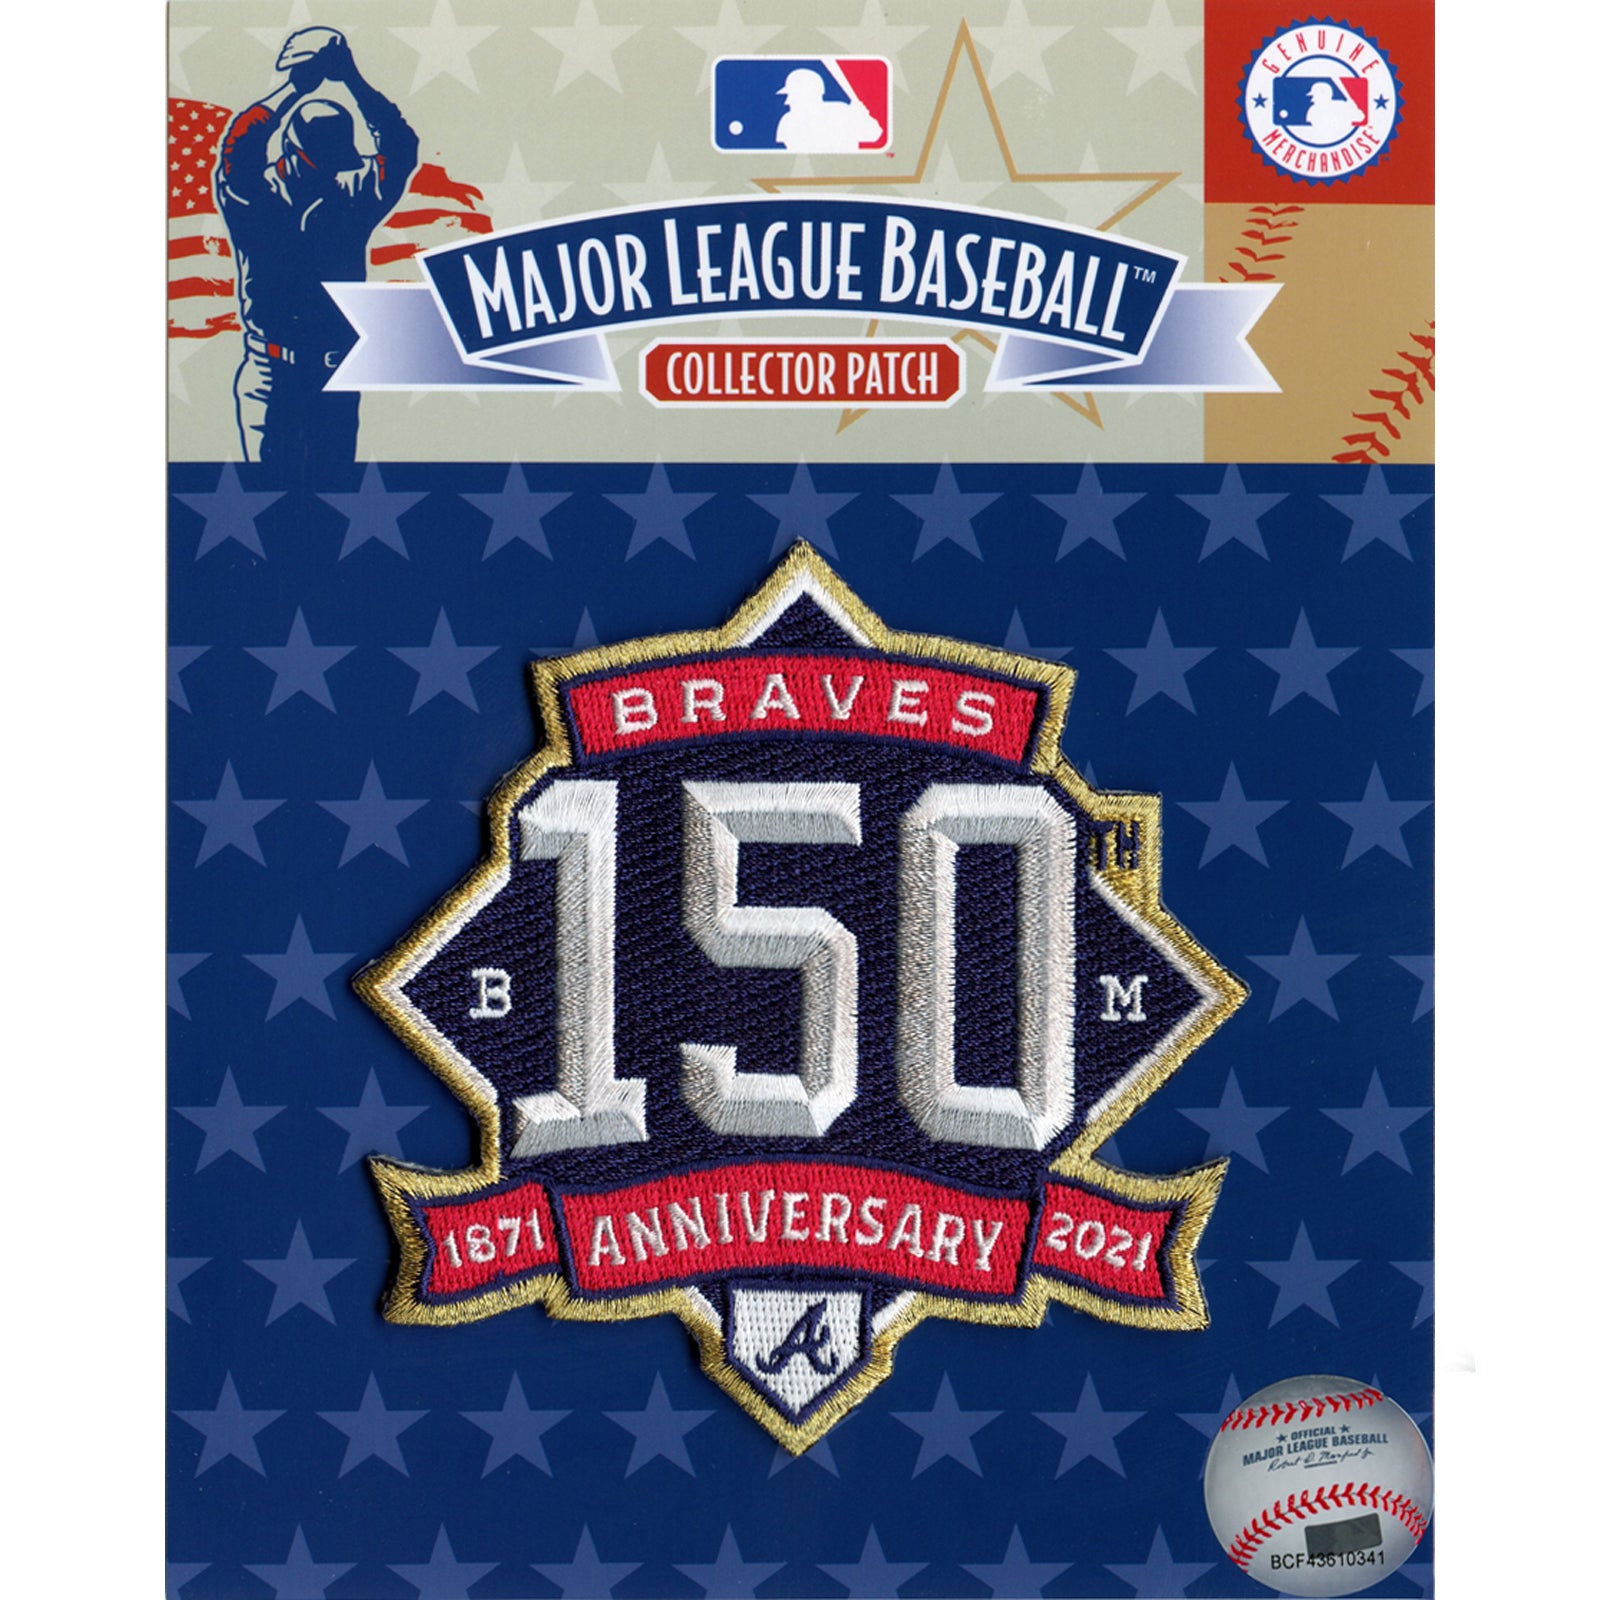 Atlanta Braves 150th Anniversary 1871-2021 thank you for the